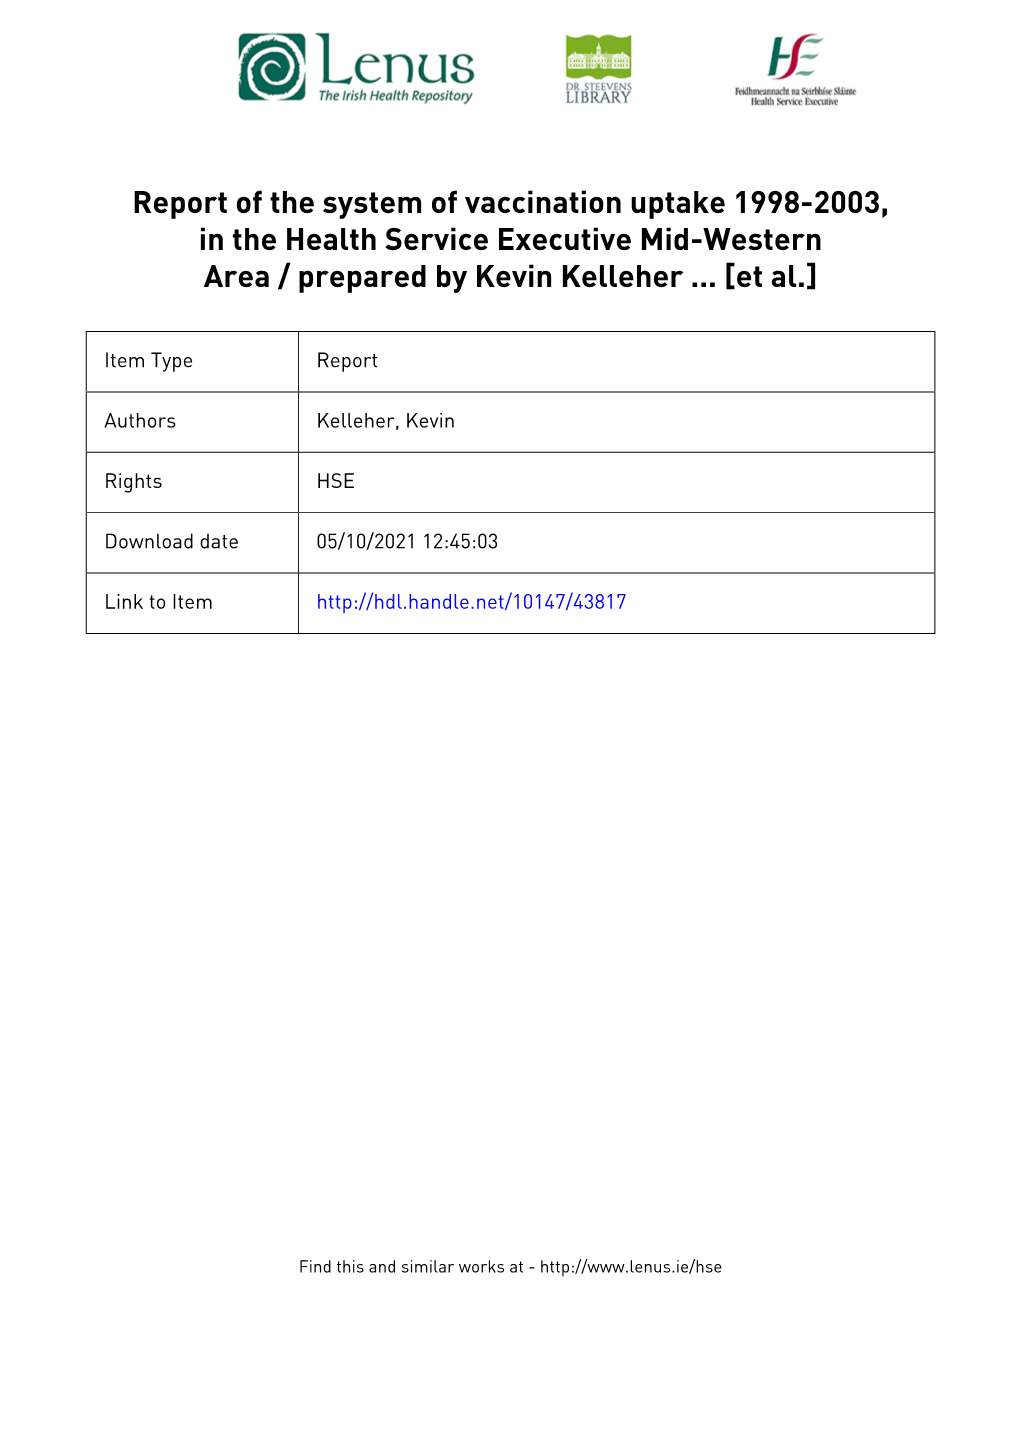 Report of the System of Vaccination Uptake 1998 – 2003, in the Health Service Executive Mid-Western Area